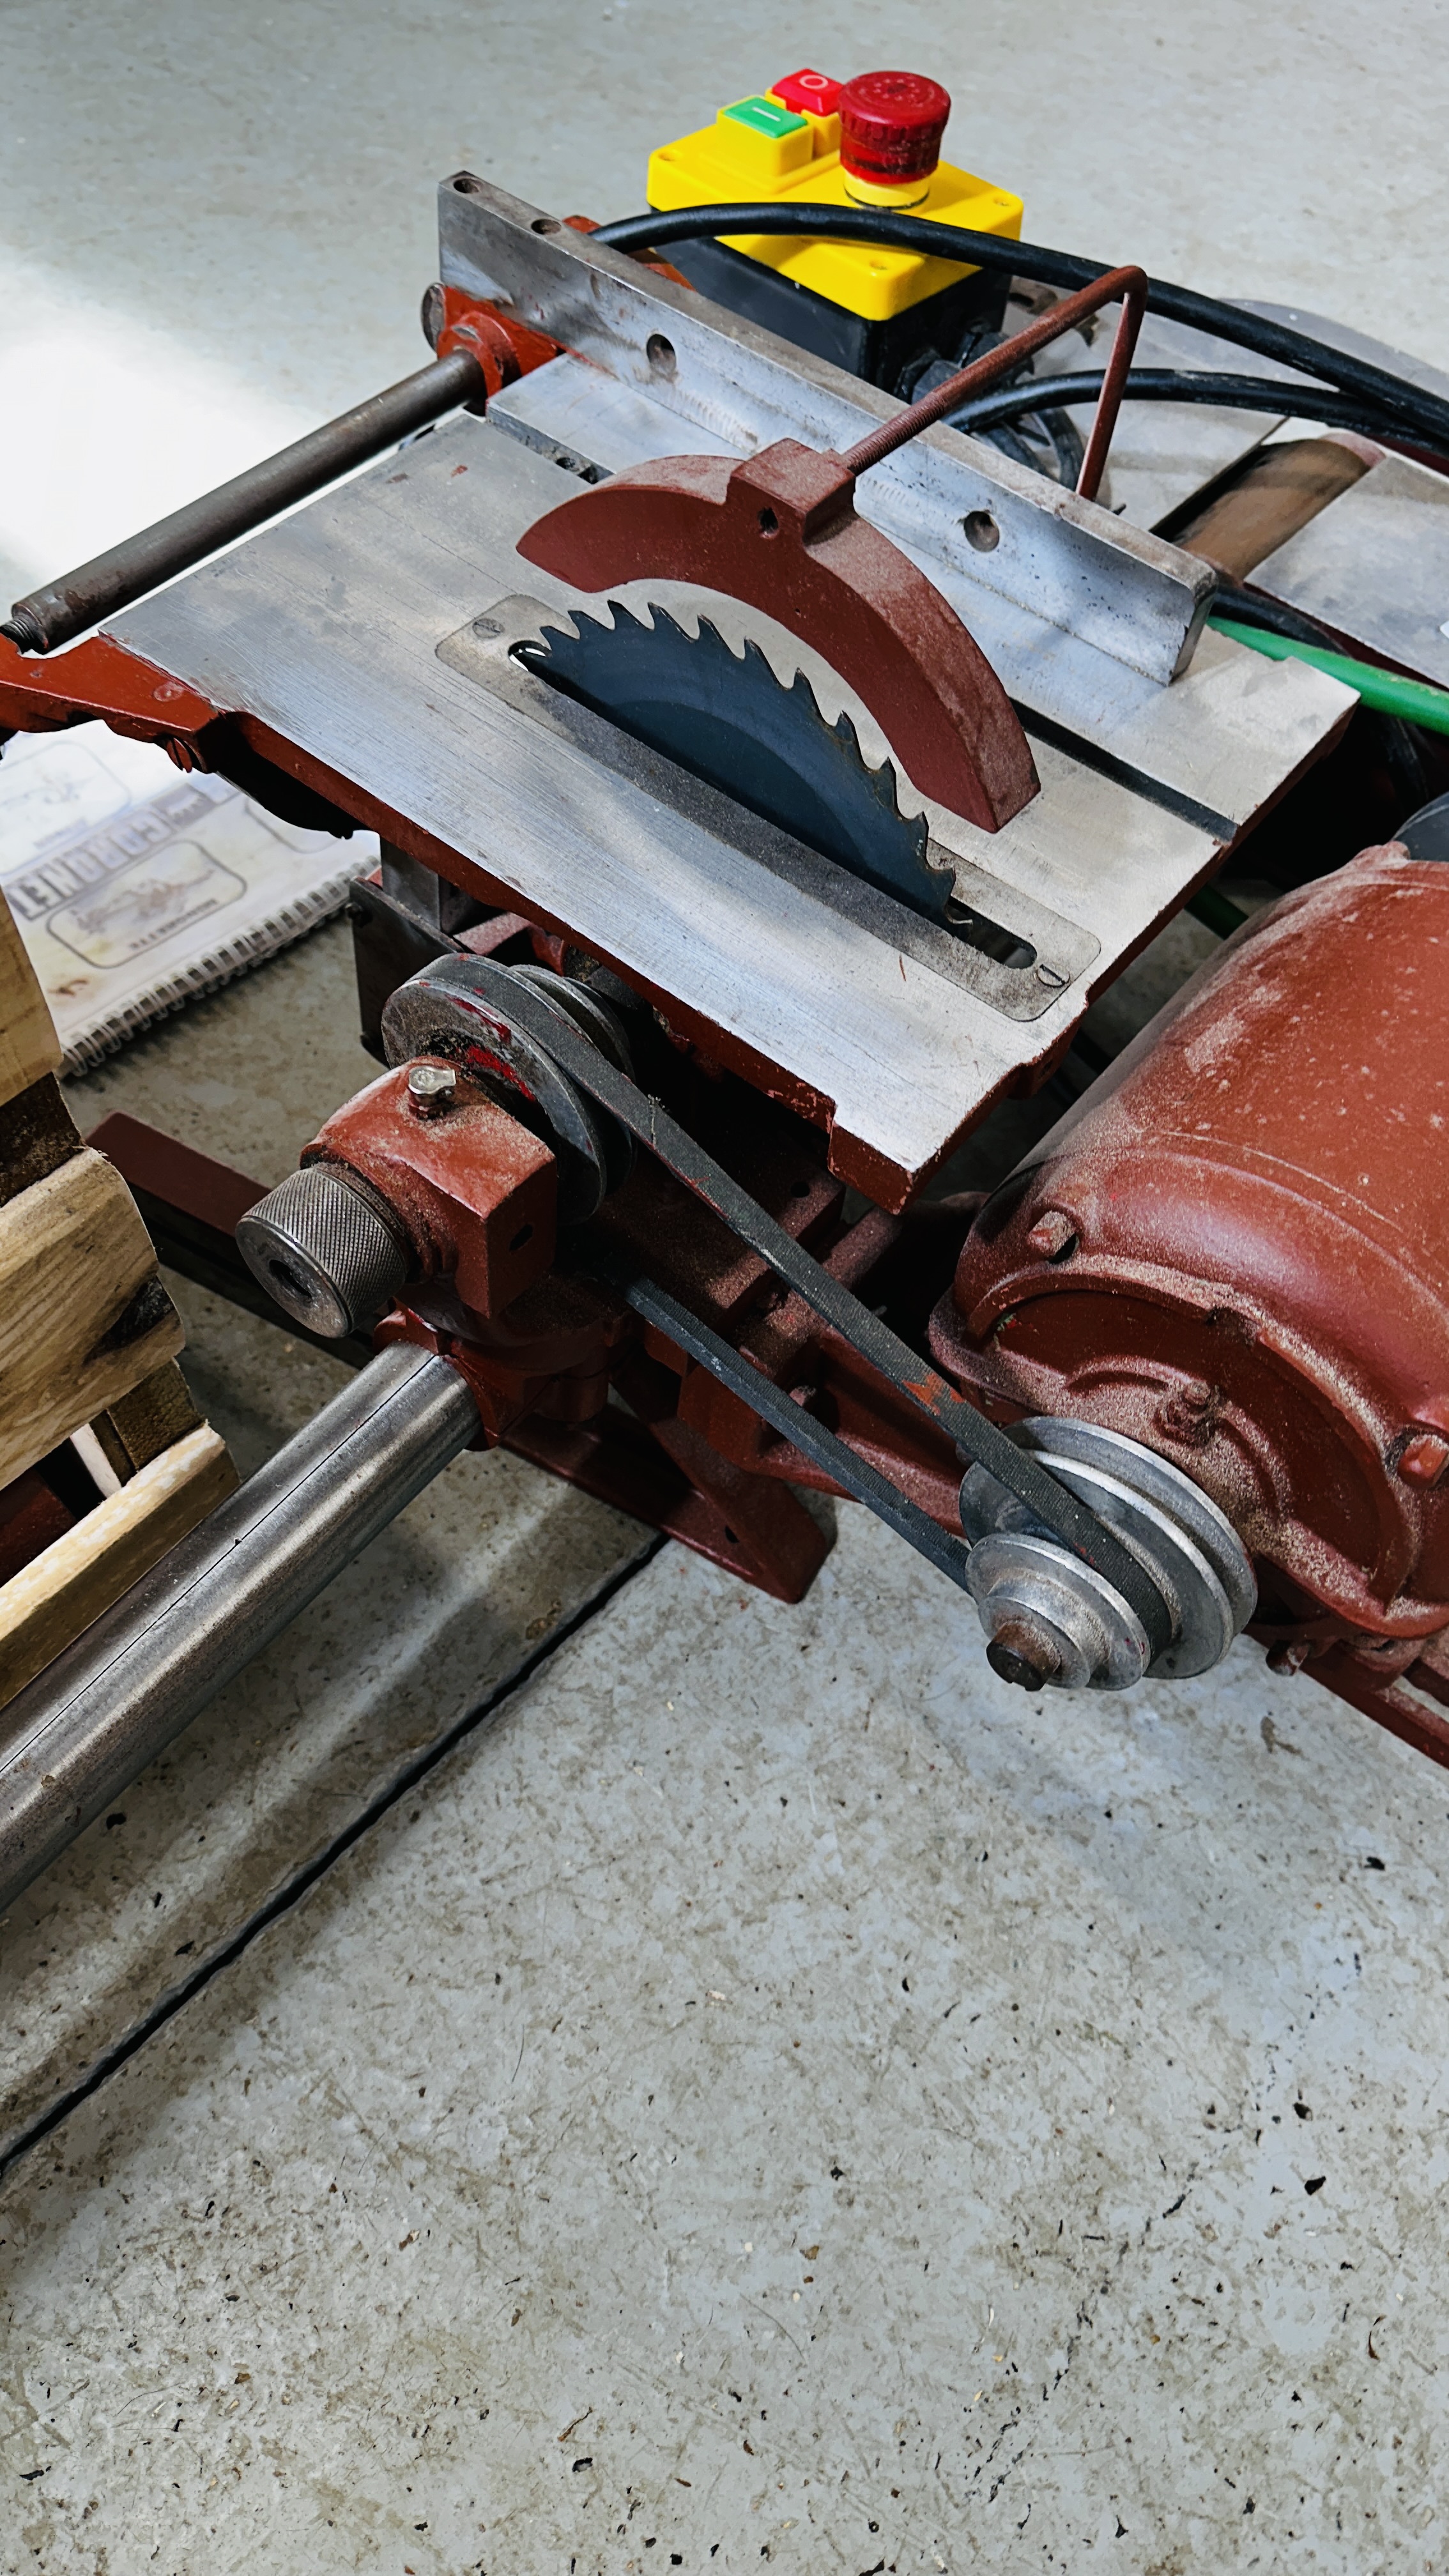 A CORONEE MINOR WOOD WORKING LATHE WITH ACCESSORIES - TRADE ONLY. - Bild 11 aus 17